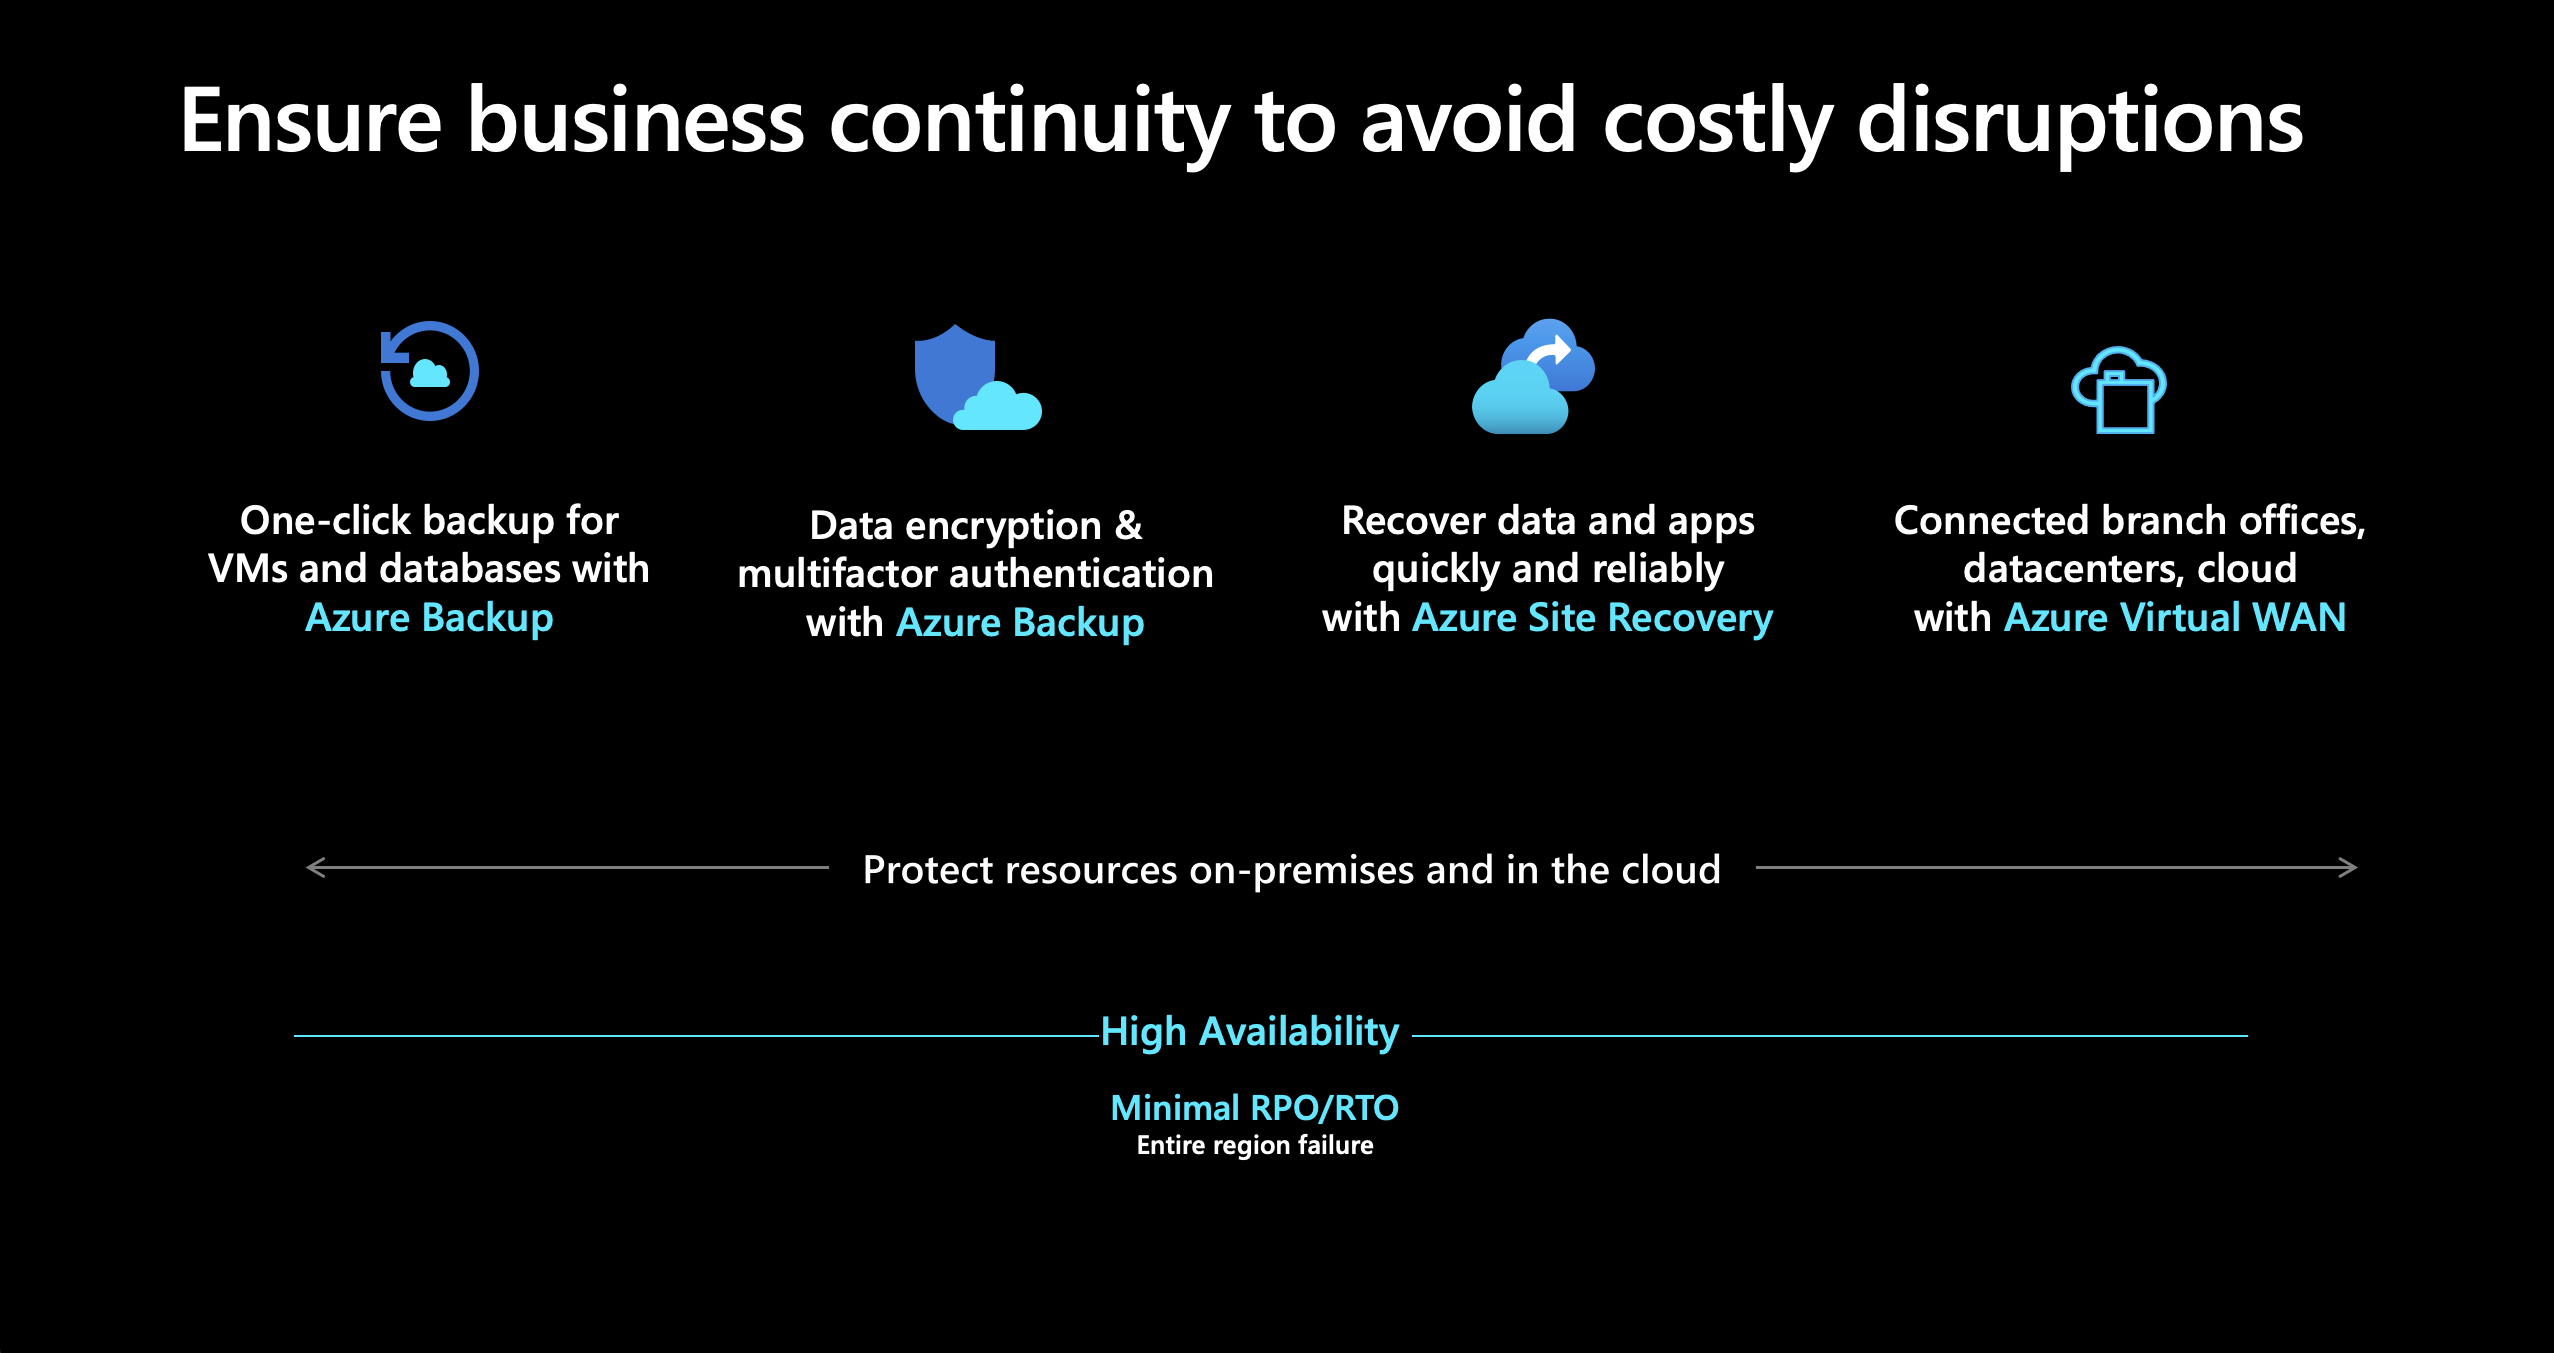 Diagram showing business continuity features in Azure.